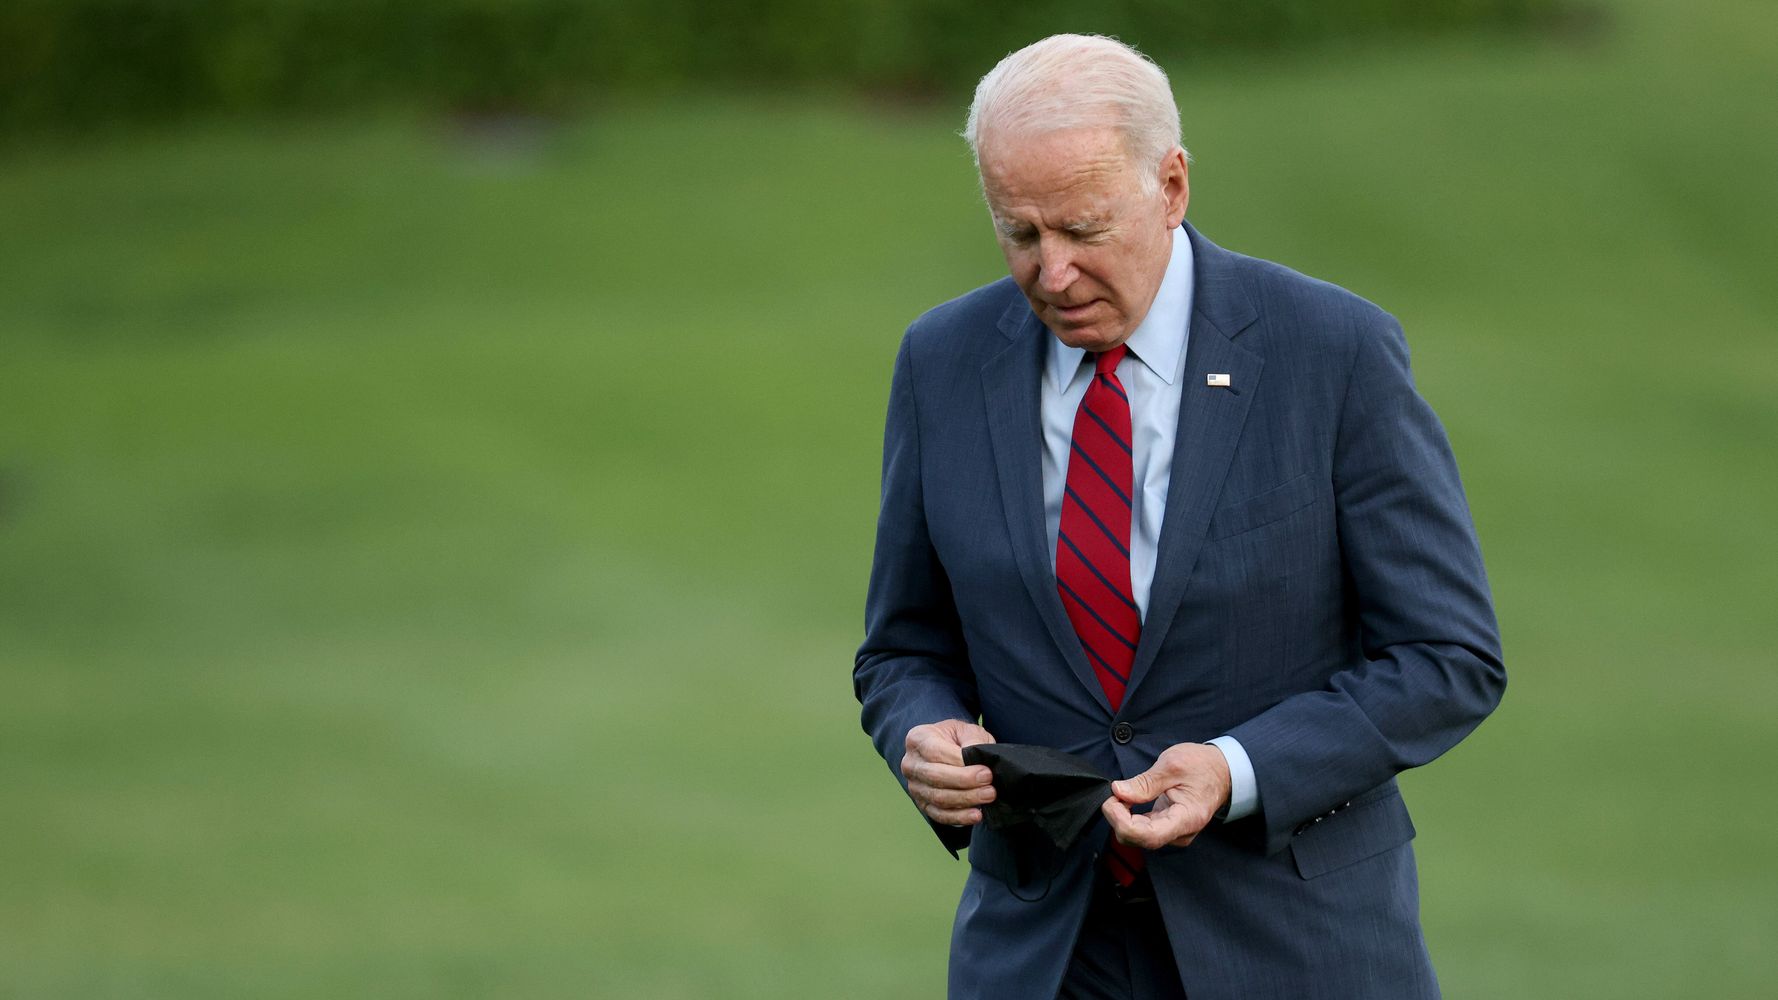 Biden’s Green Allies Launch Major Campaign As Bipartisan Deal Shrinks From Climate